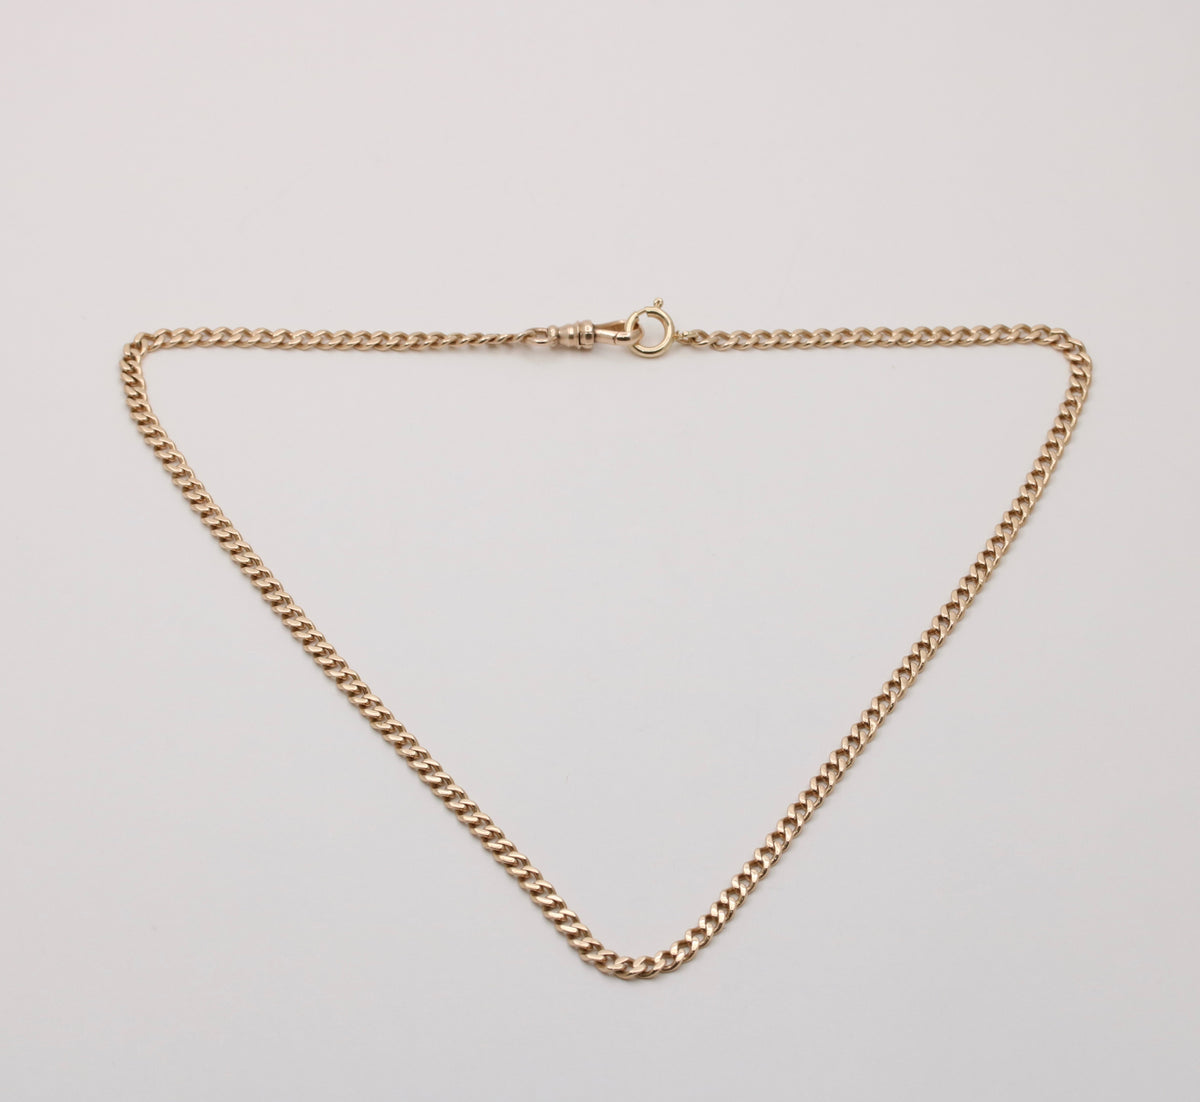 Art Deco 14K Rosy Gold Curb Link Chain, 17.25” Long